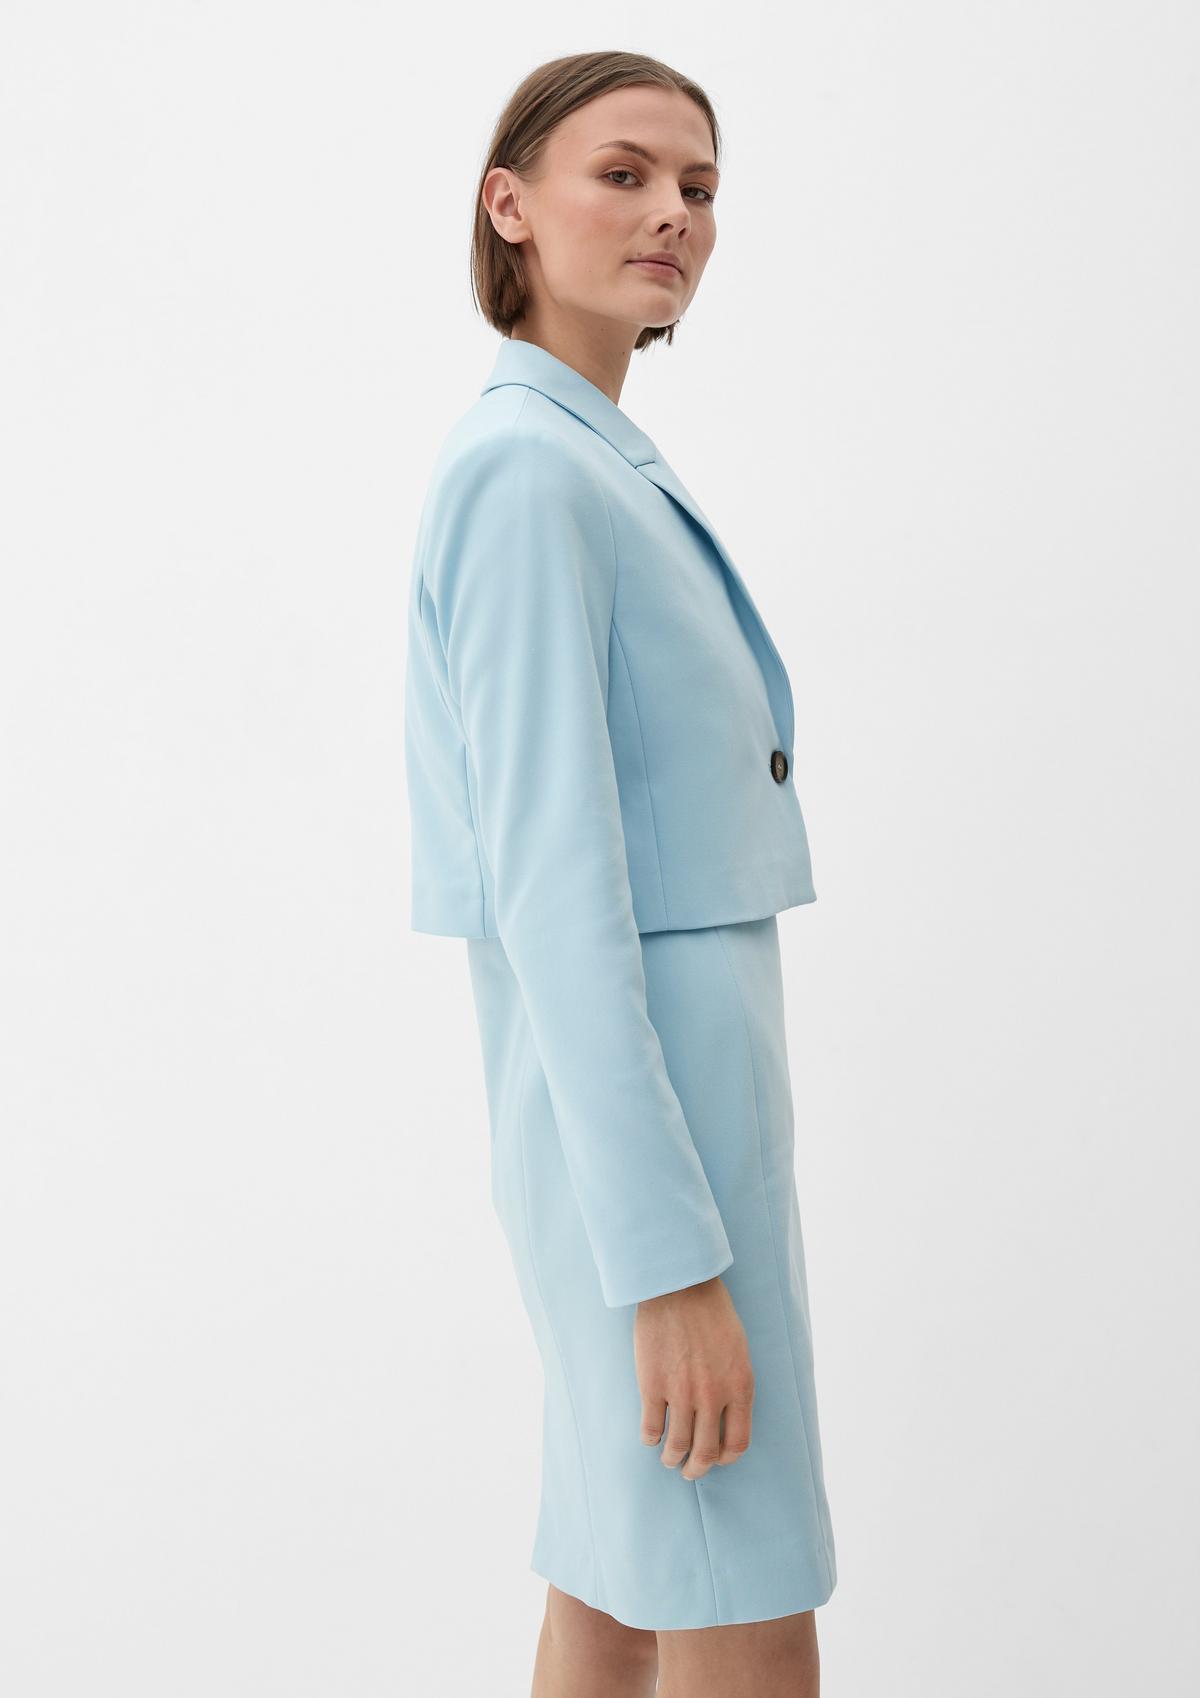 s.Oliver Cropped blazer made of a cotton blend